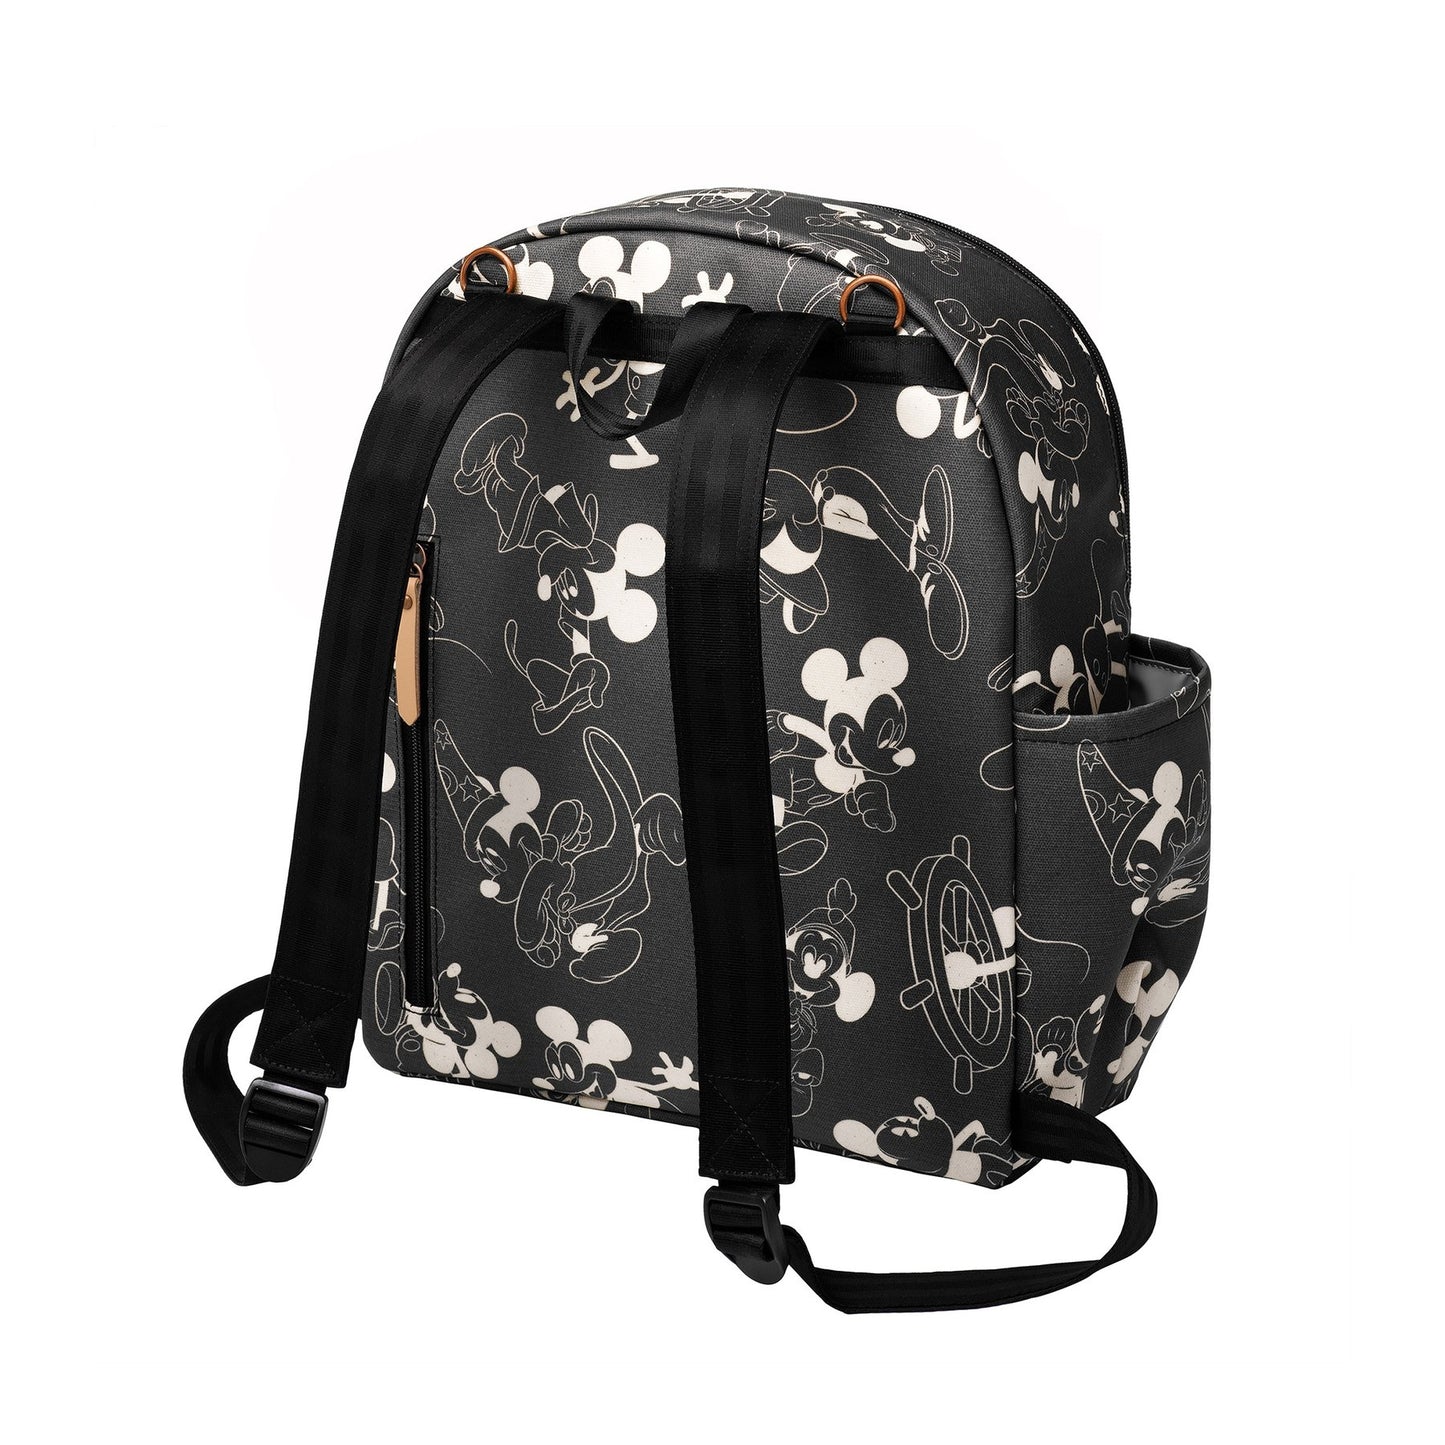 Petunia Pickle Bottom Ace Backpack In Disney Mickey Mouse Print